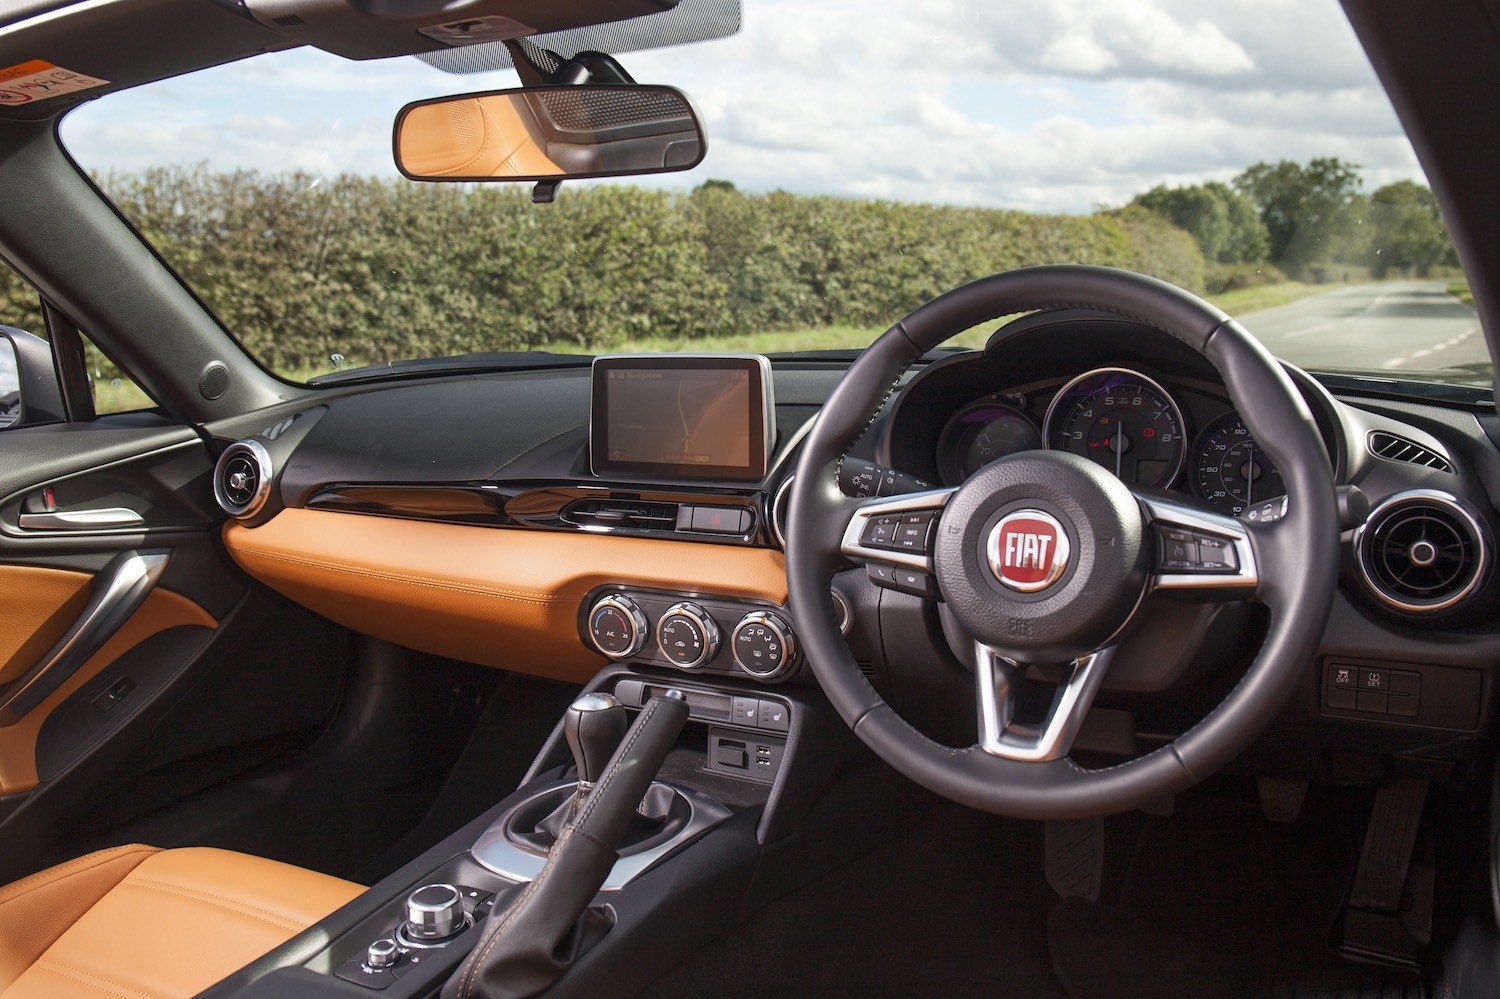 Neil Lyndon reviews the Fiat 124 Spider Lusso Plus for Drive 8